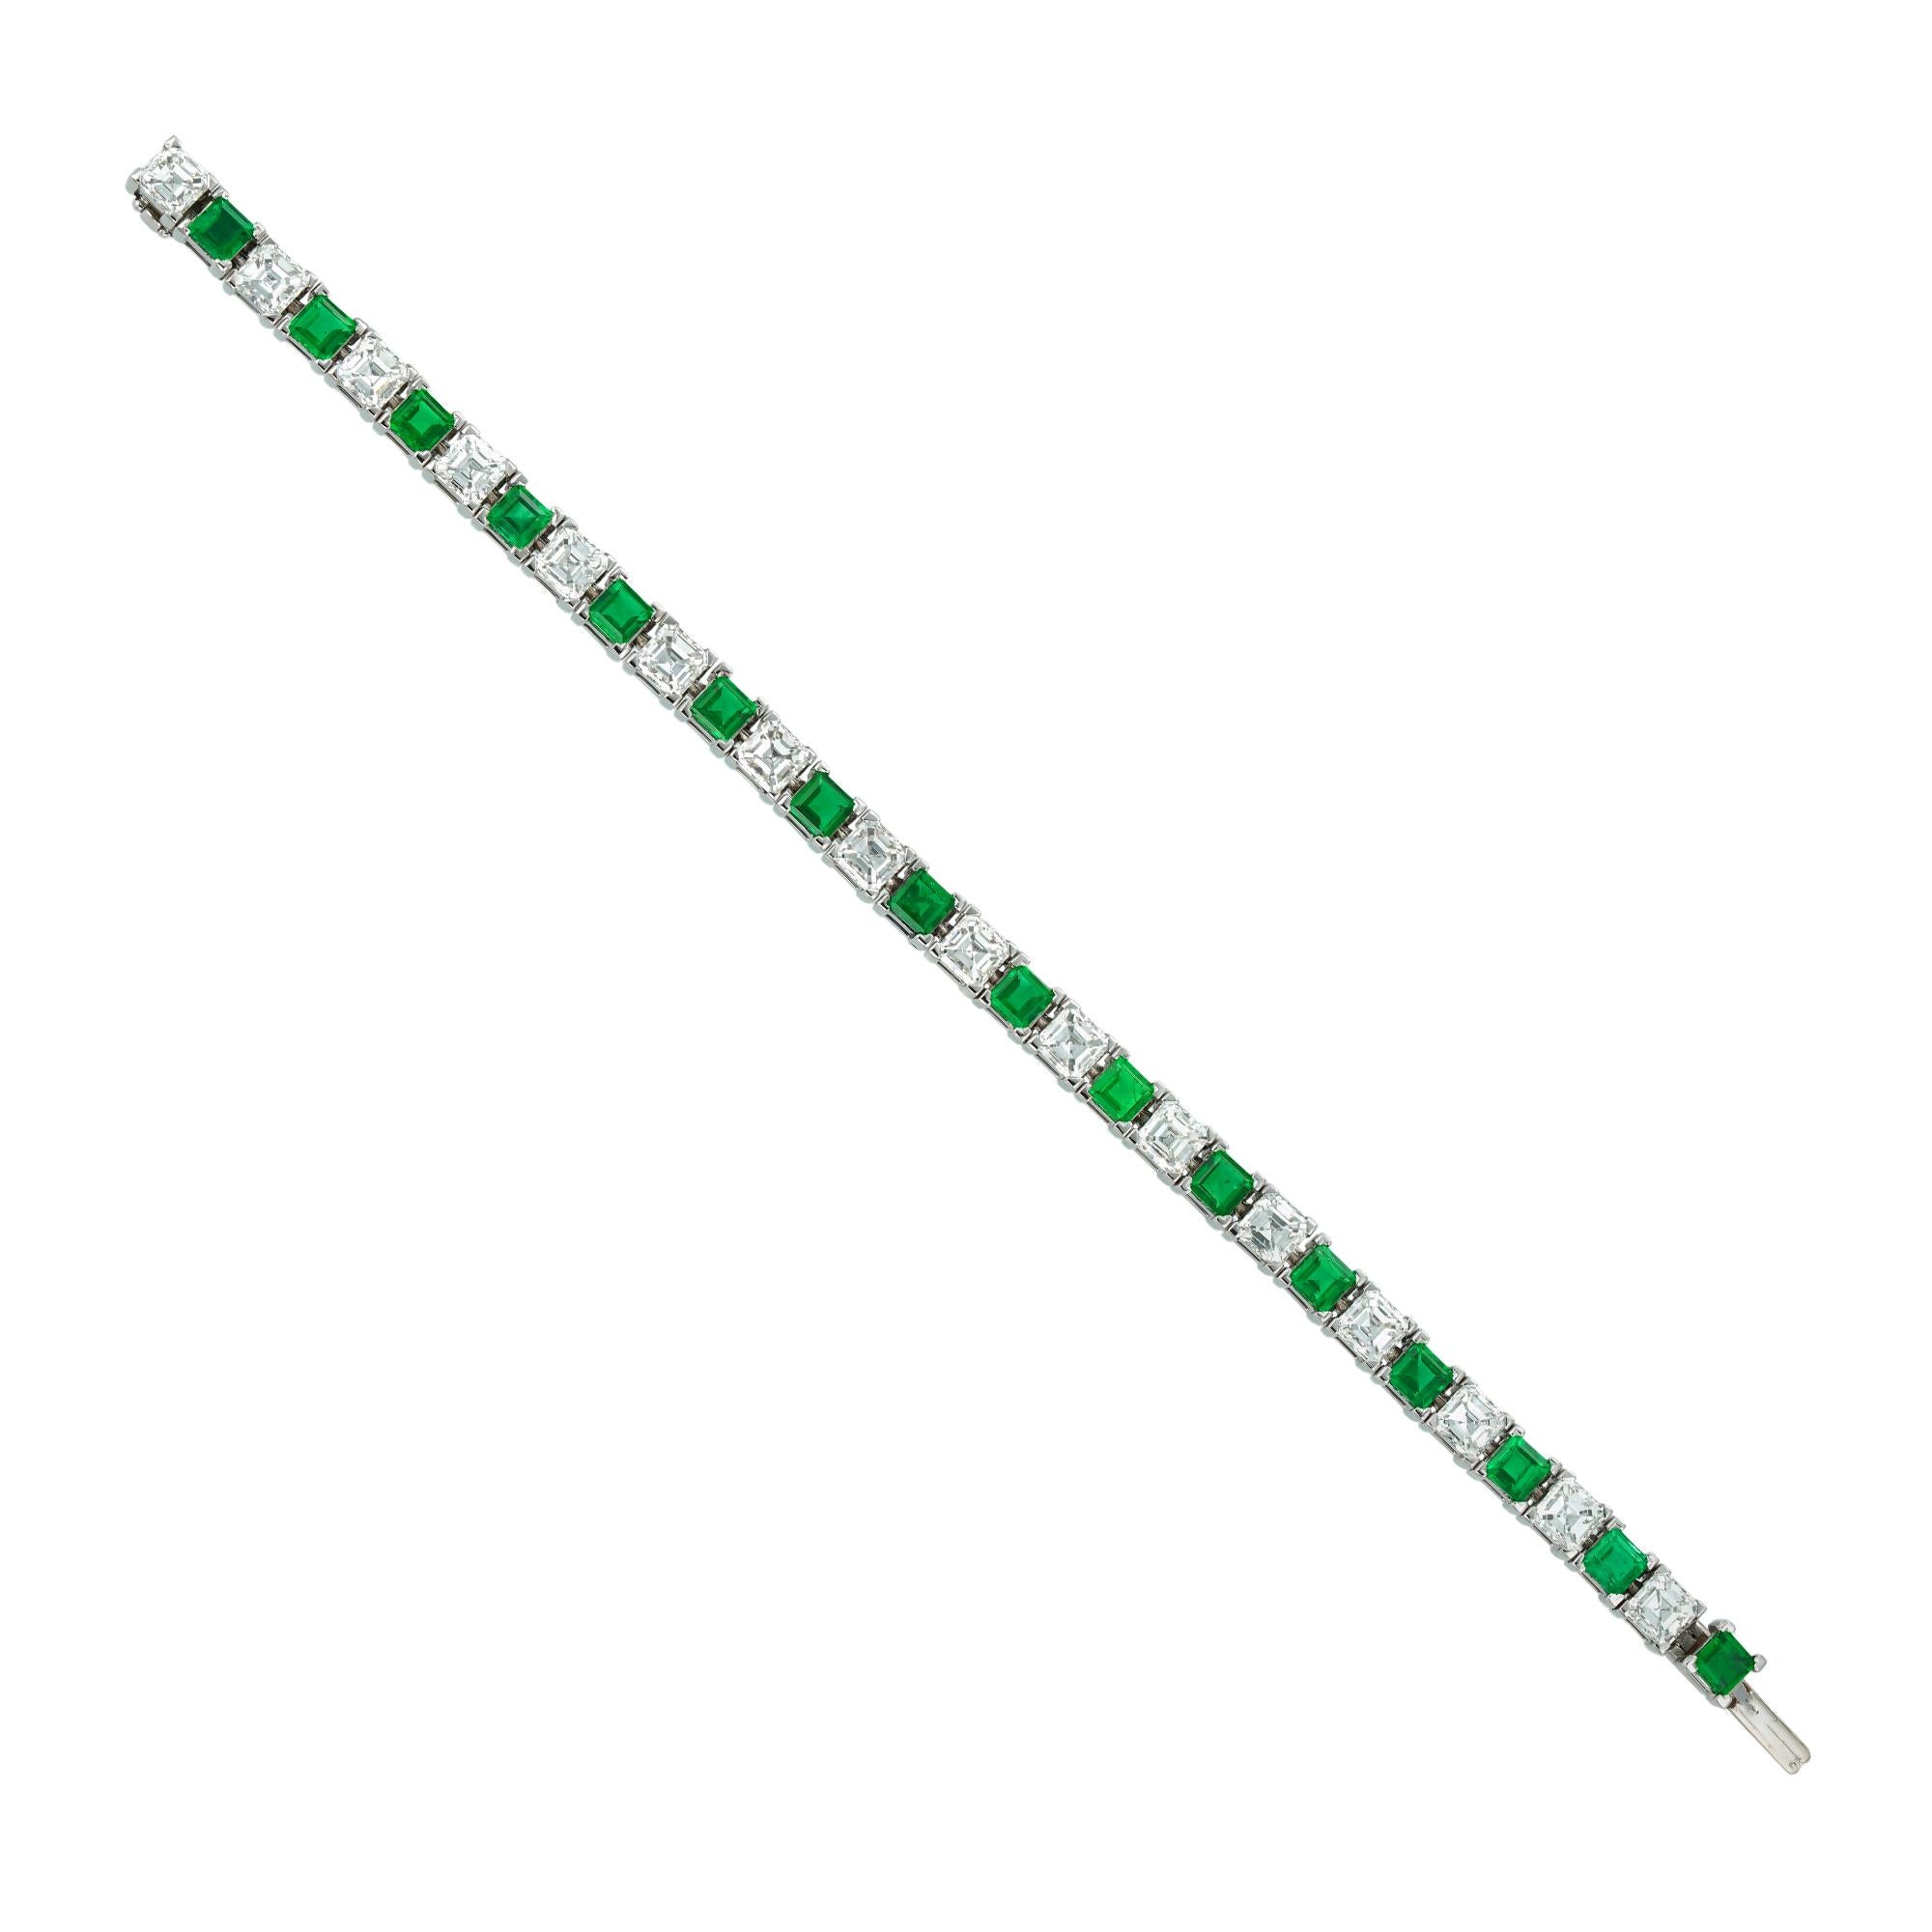 An important emerald and Assher-cut diamond line bracelet by Asprey, consisting of sixteen Assher-cut diamonds weighing 8.44 carats in total, alternately-set with sixteen square-cut emeralds weighing 4.58 carats in total, all four-claw-set in